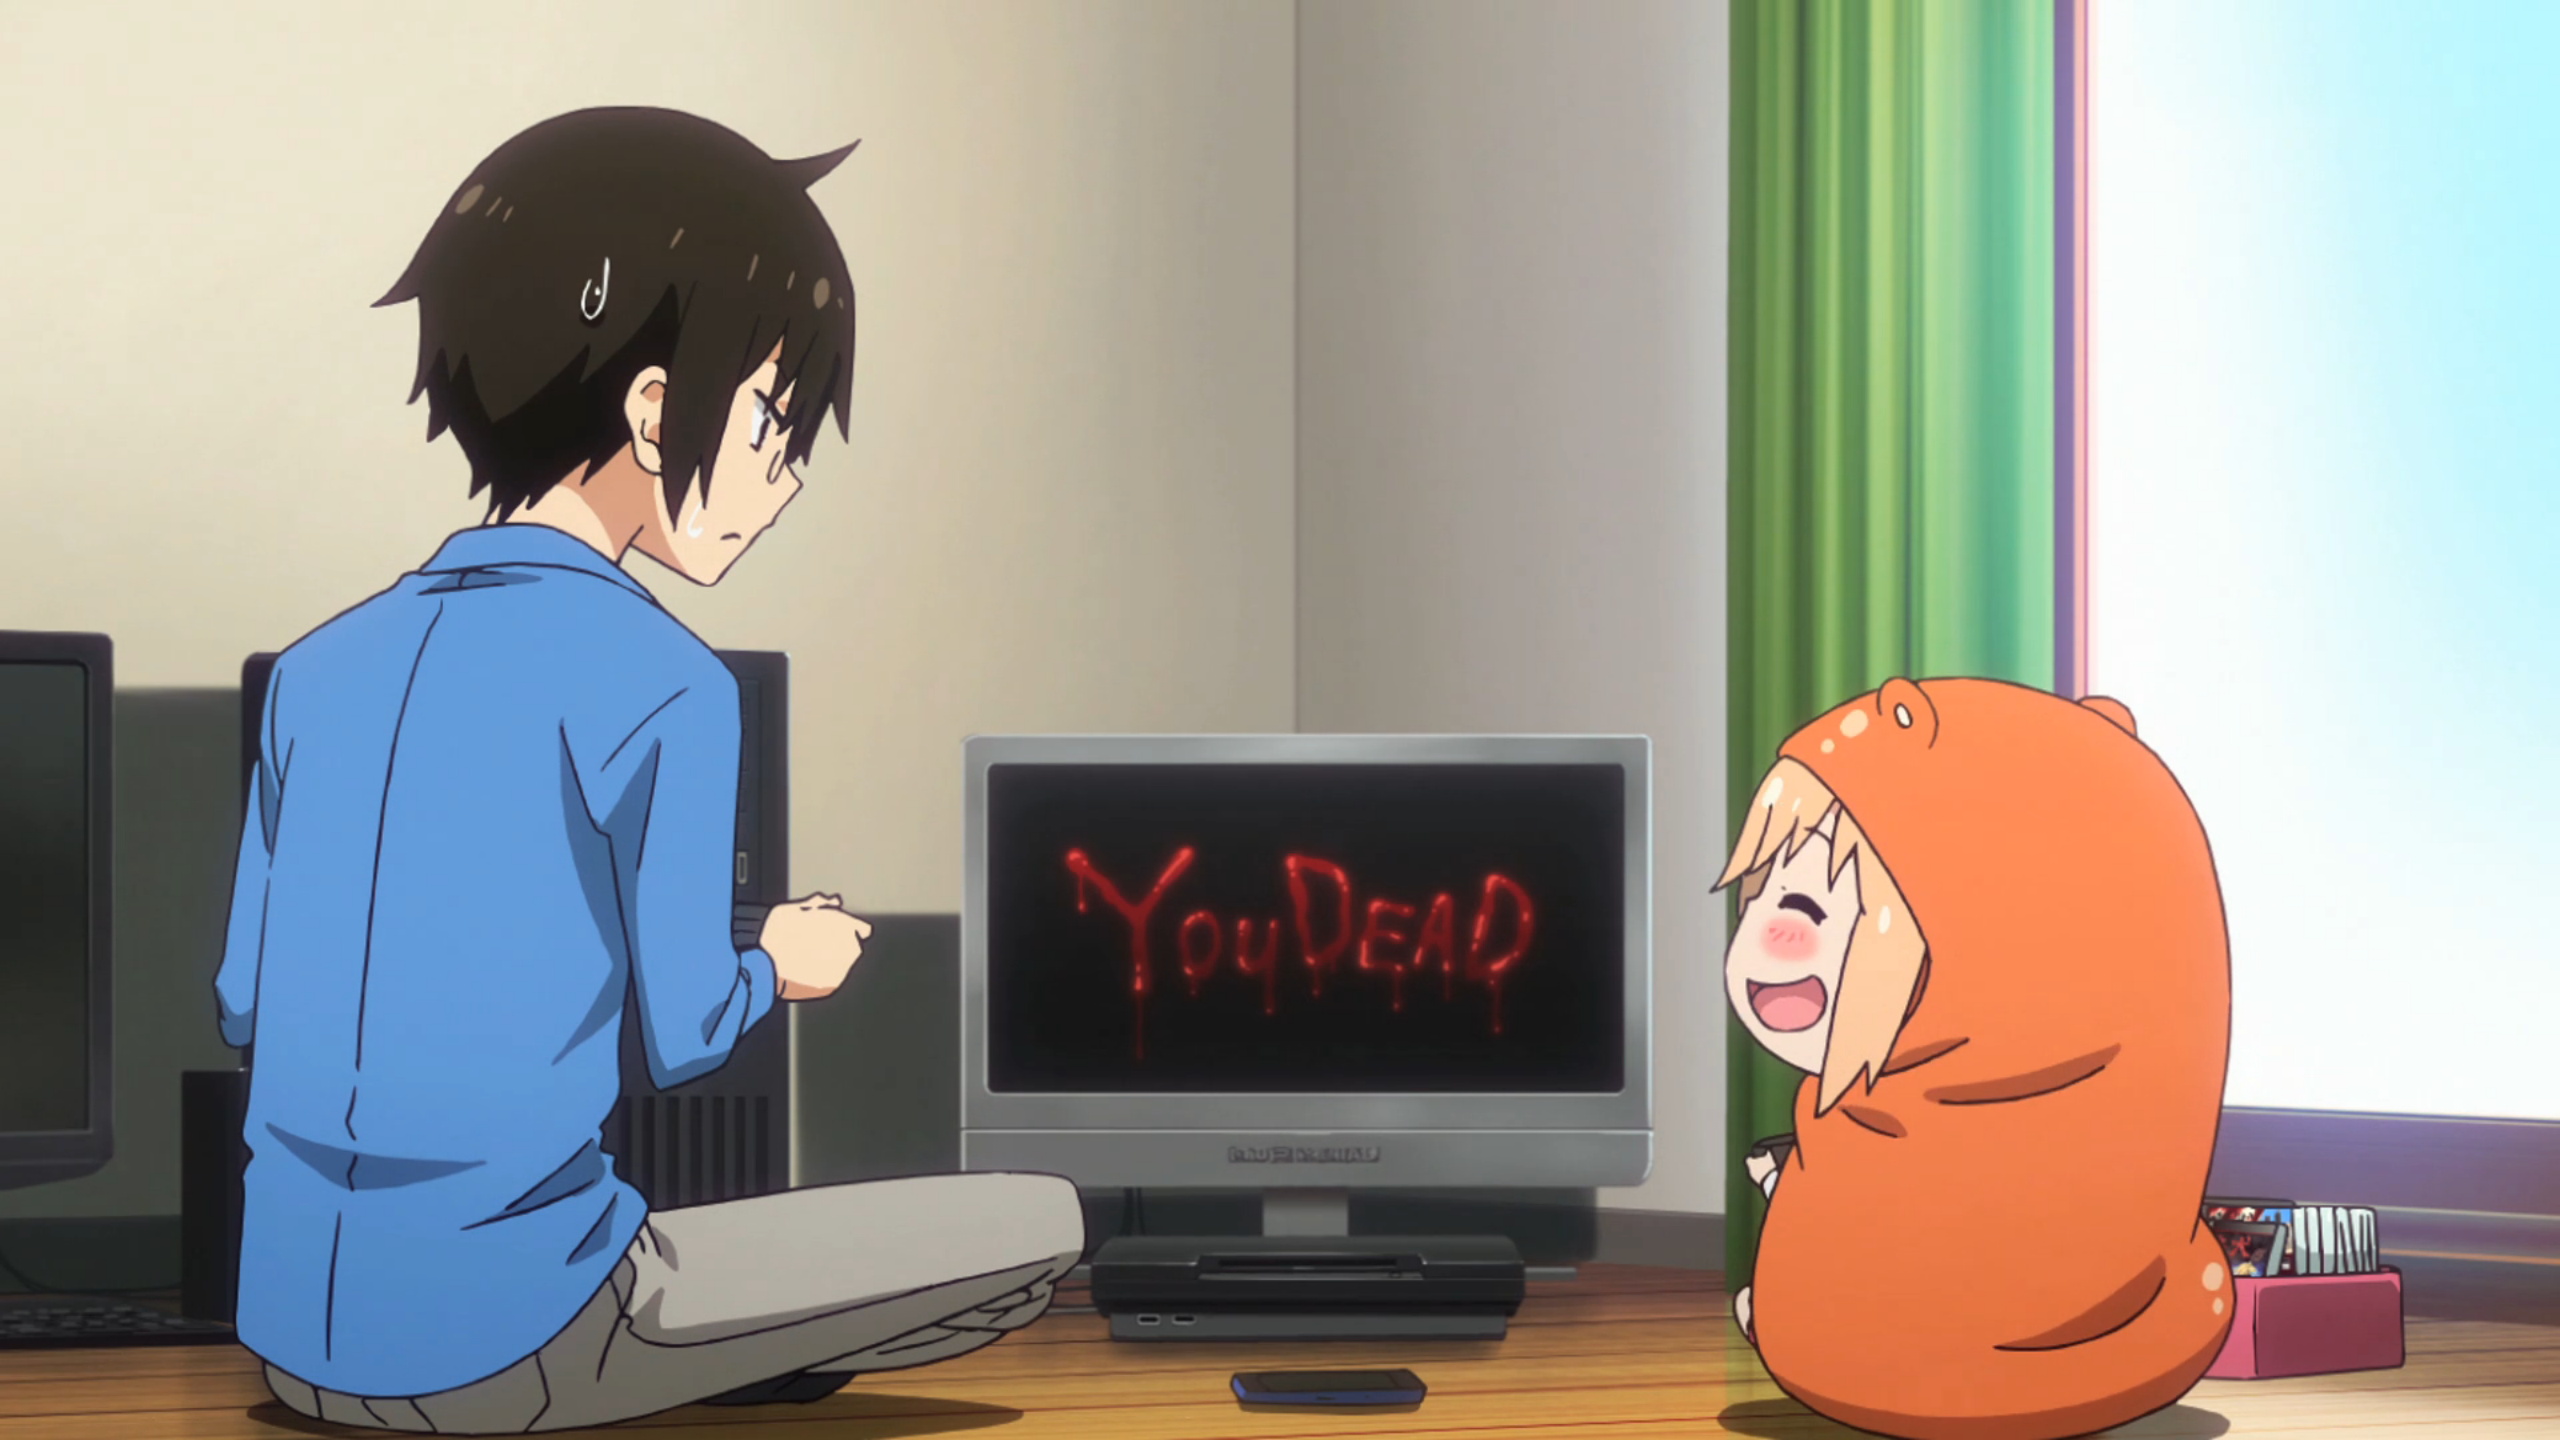 AT LAST, THE ARTIST HERSELF ENTERS UMARU-MODE